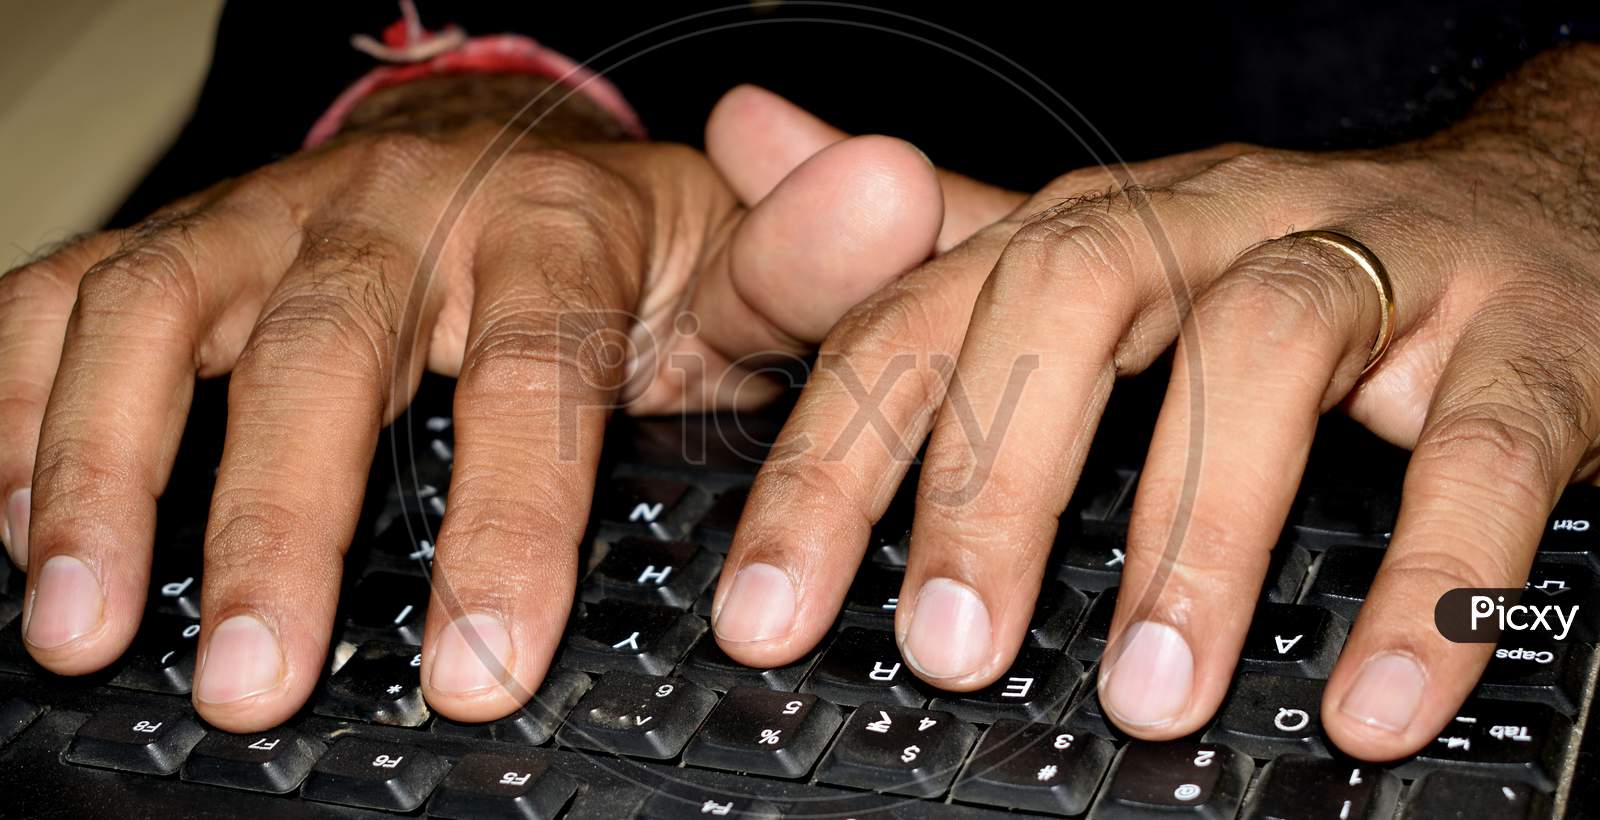 Keyboard And Fingers